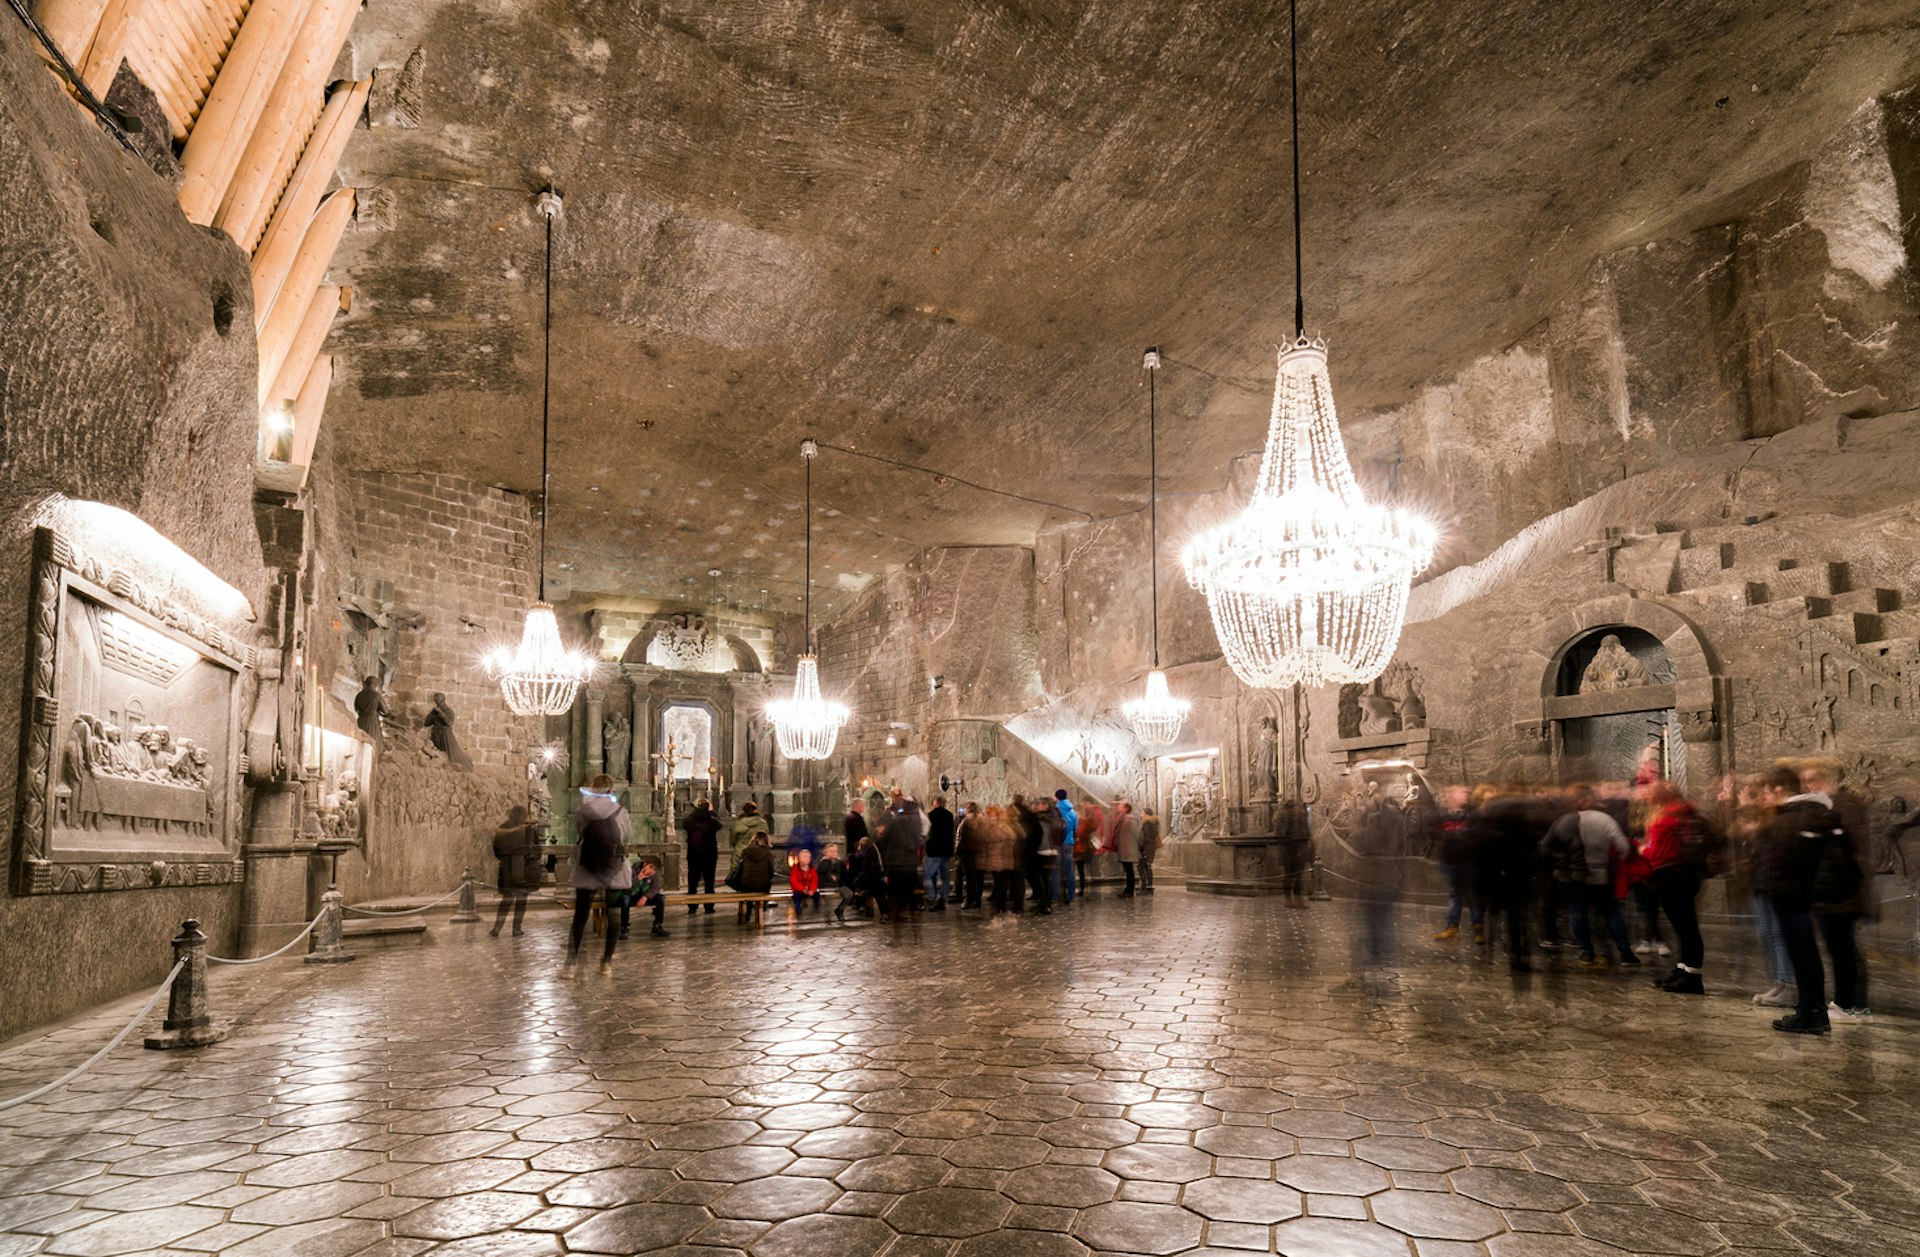 The main chamber in a vast salt mine, with chandeliers hanging down and people moving around